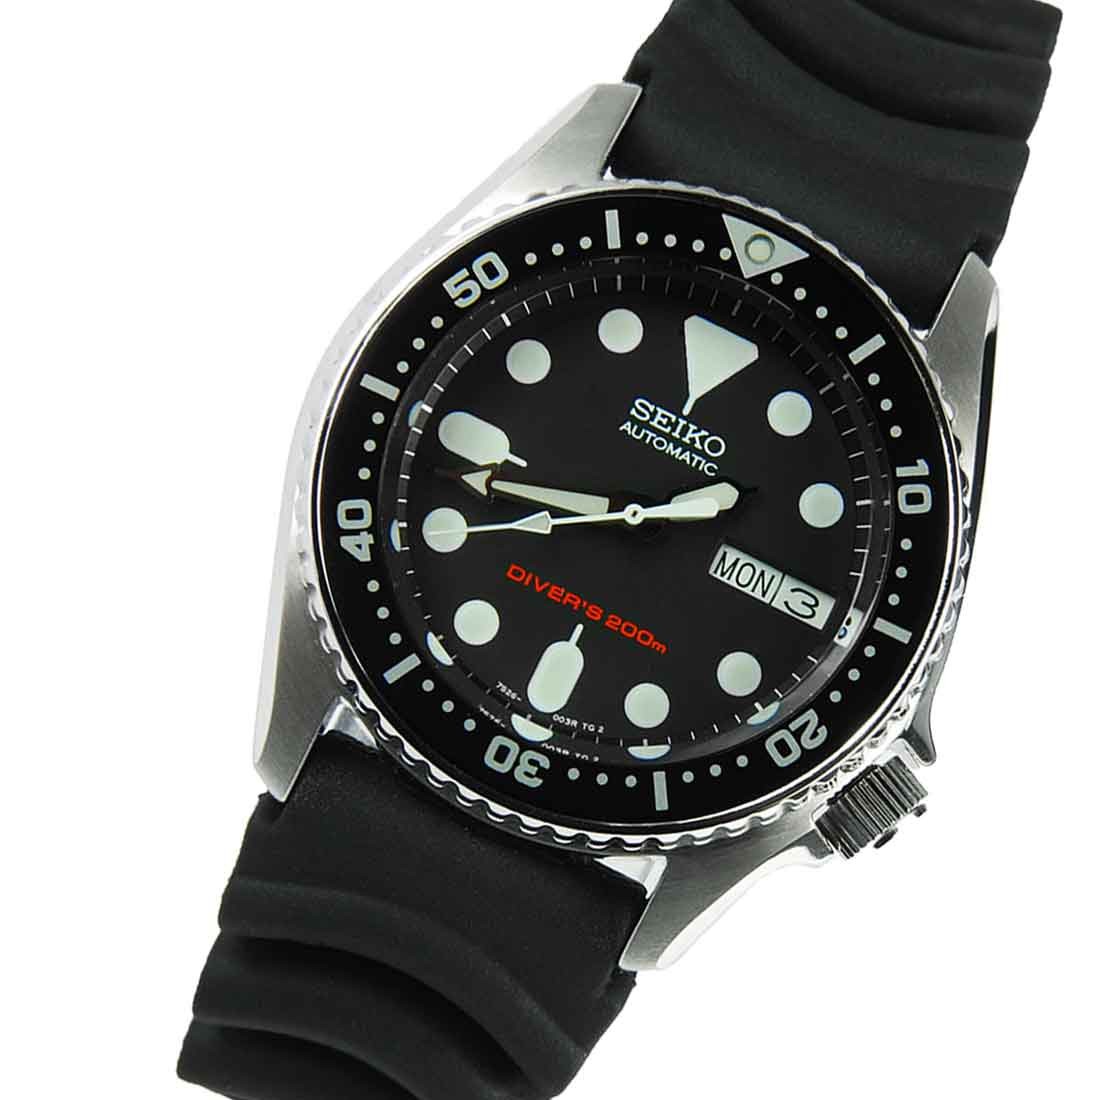 Seiko Men's Automatic Watch SKX013 Review - The Watch Blog